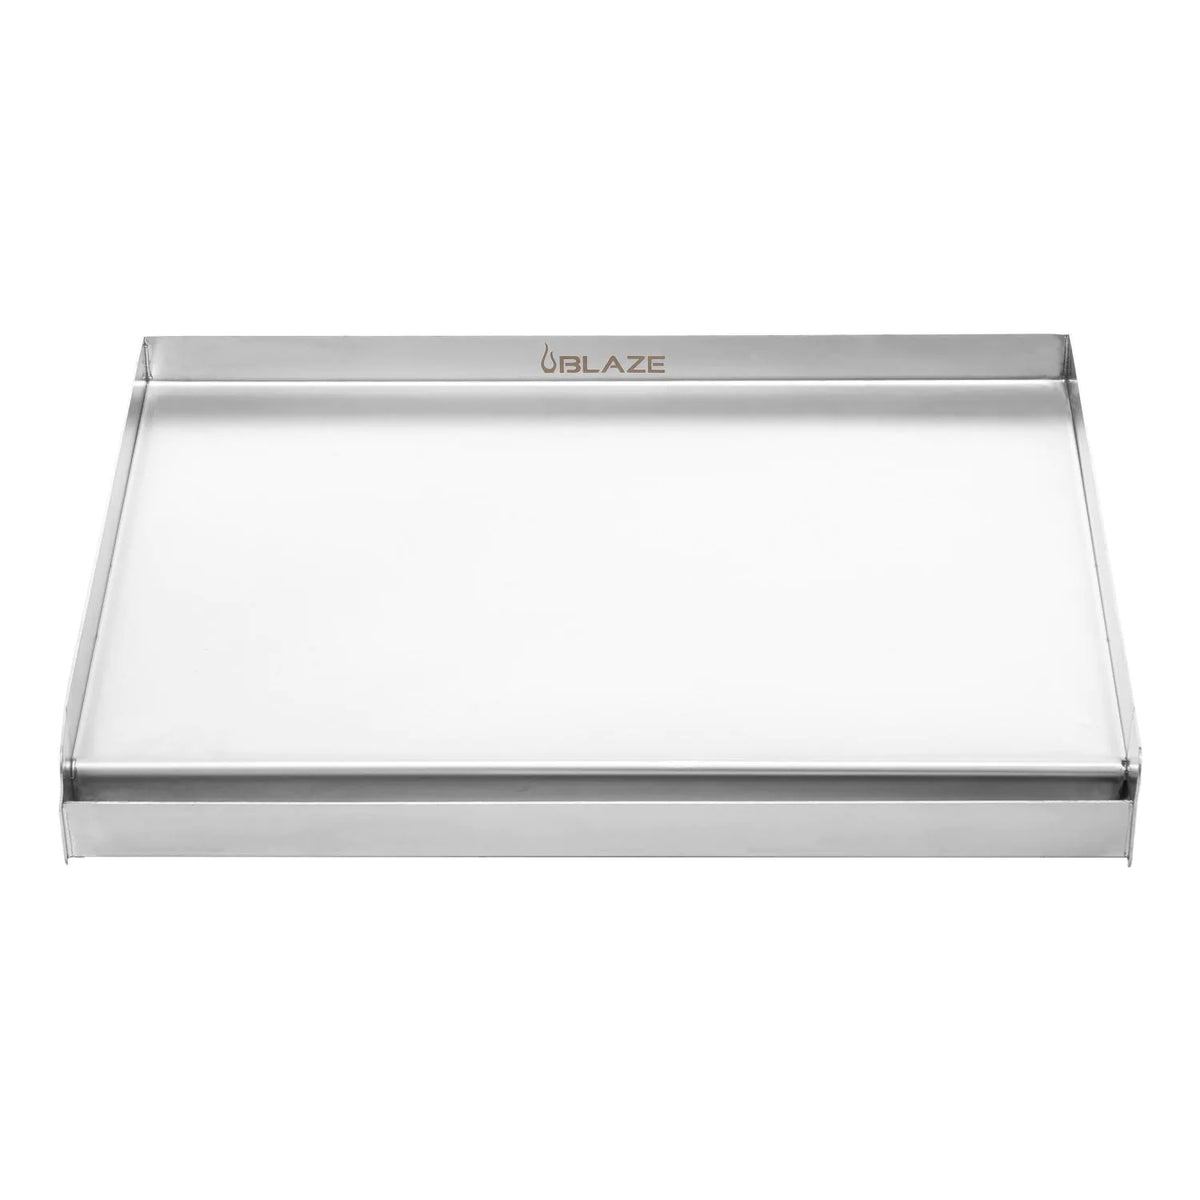 Blaze 24 Inch Griddle Plate Front View